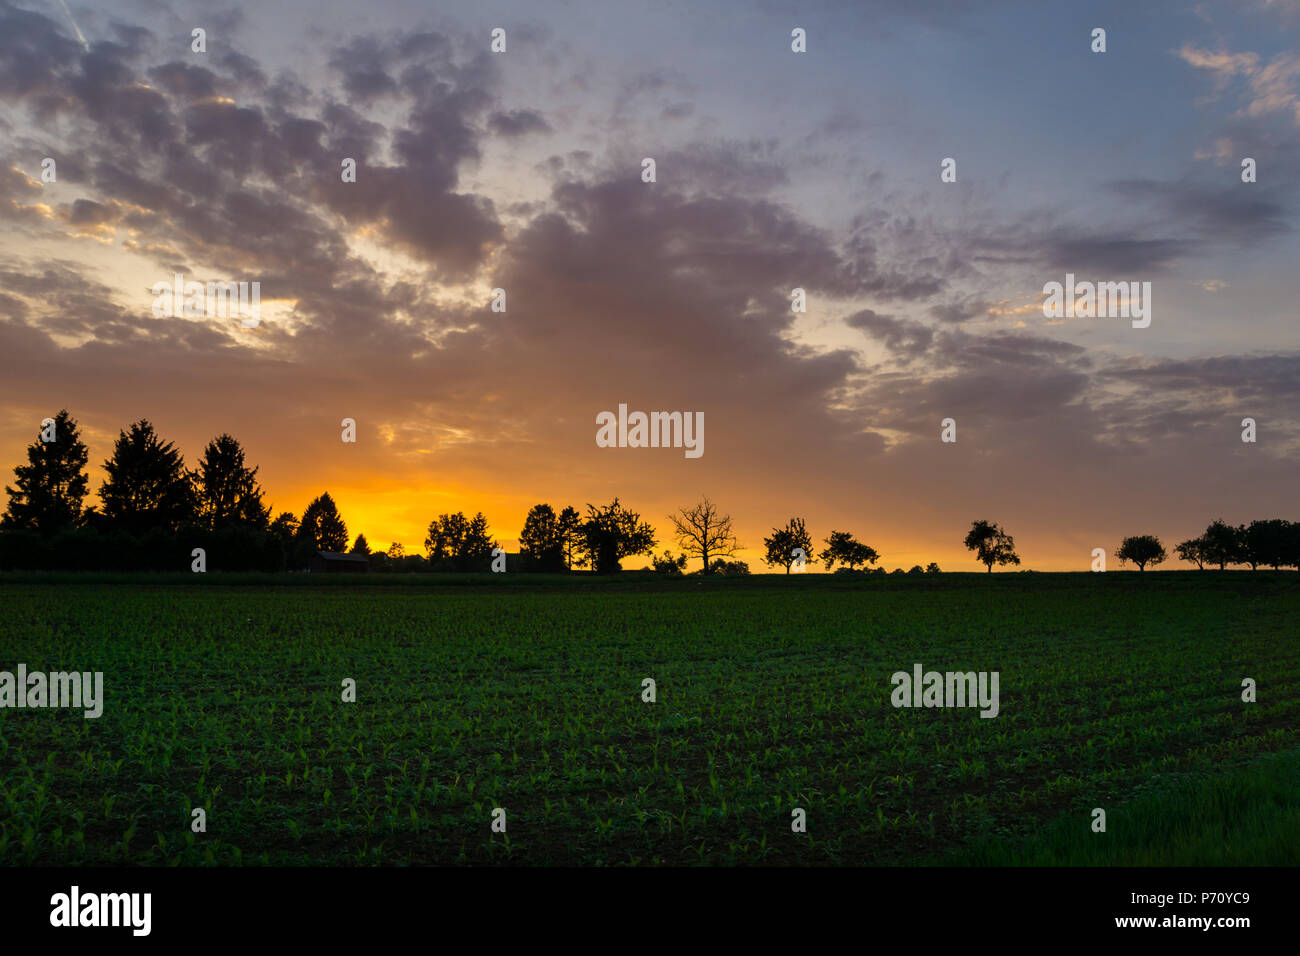 Intense orange sky of afterglow behind green field and trees Stock Photo